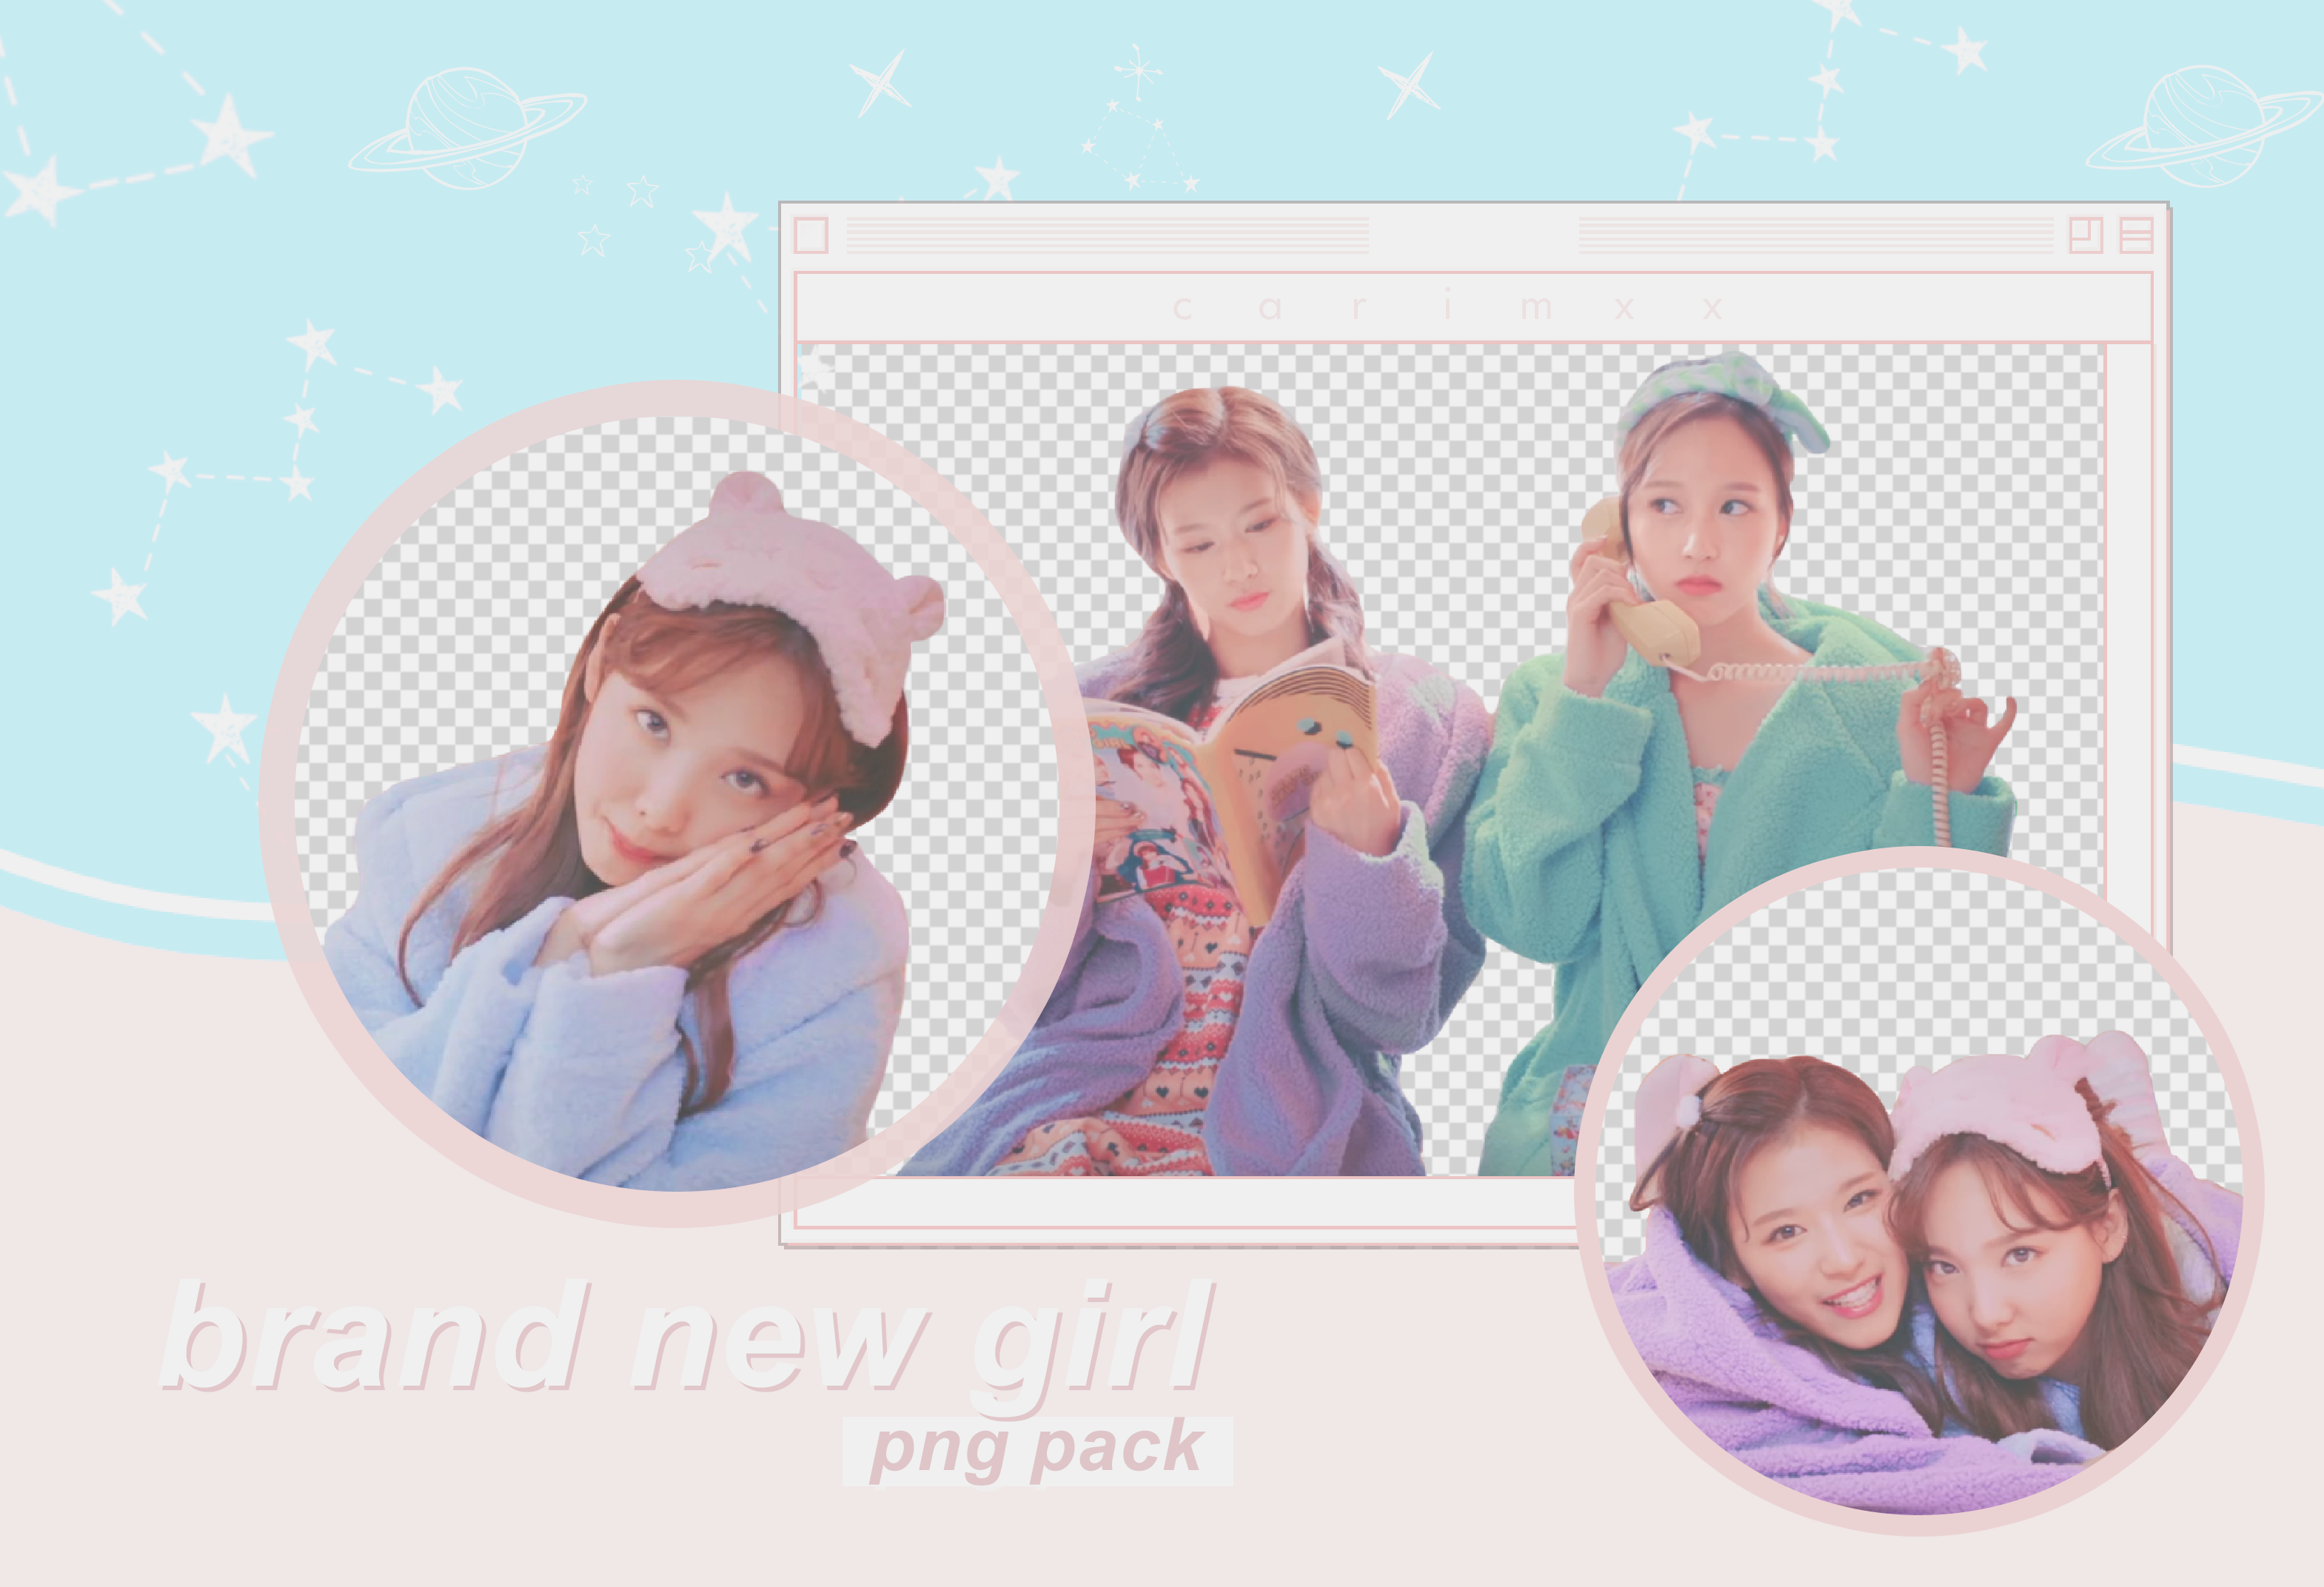 Twice Brand New Girl Png Pack By Carimxx On Deviantart